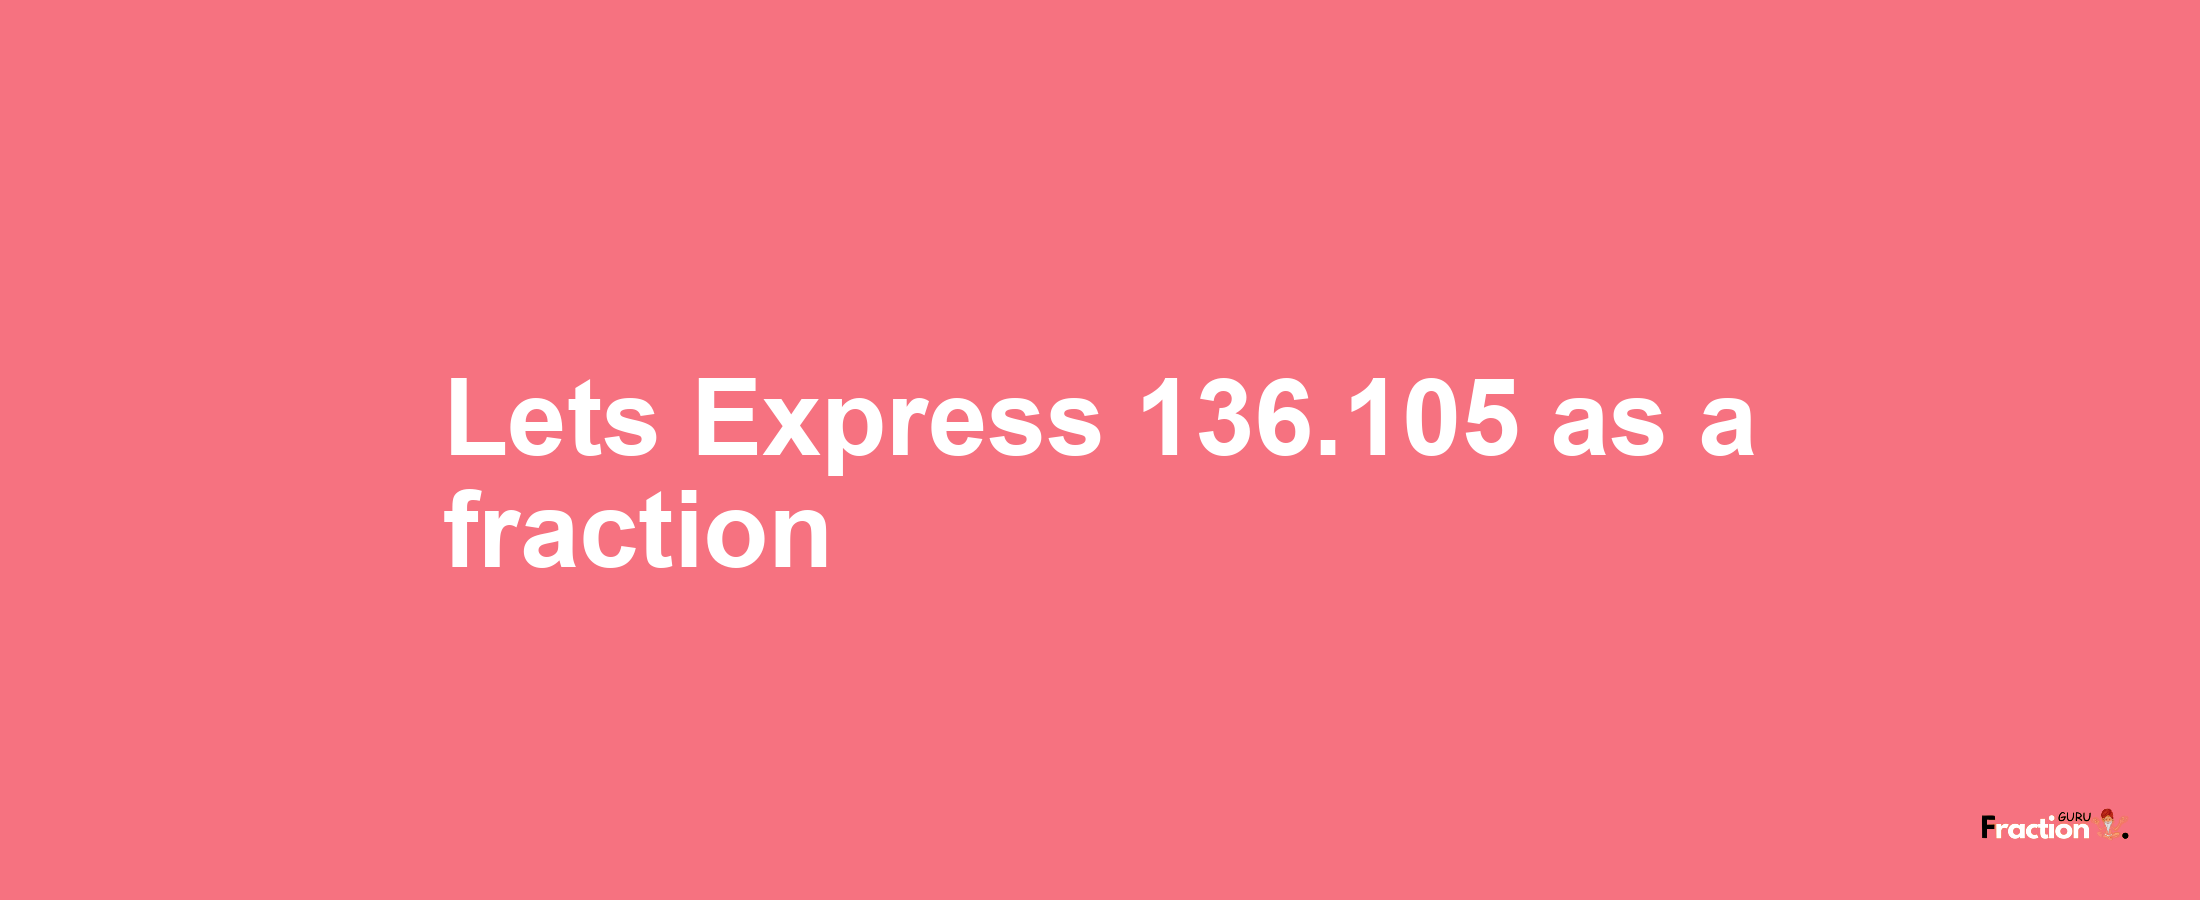 Lets Express 136.105 as afraction